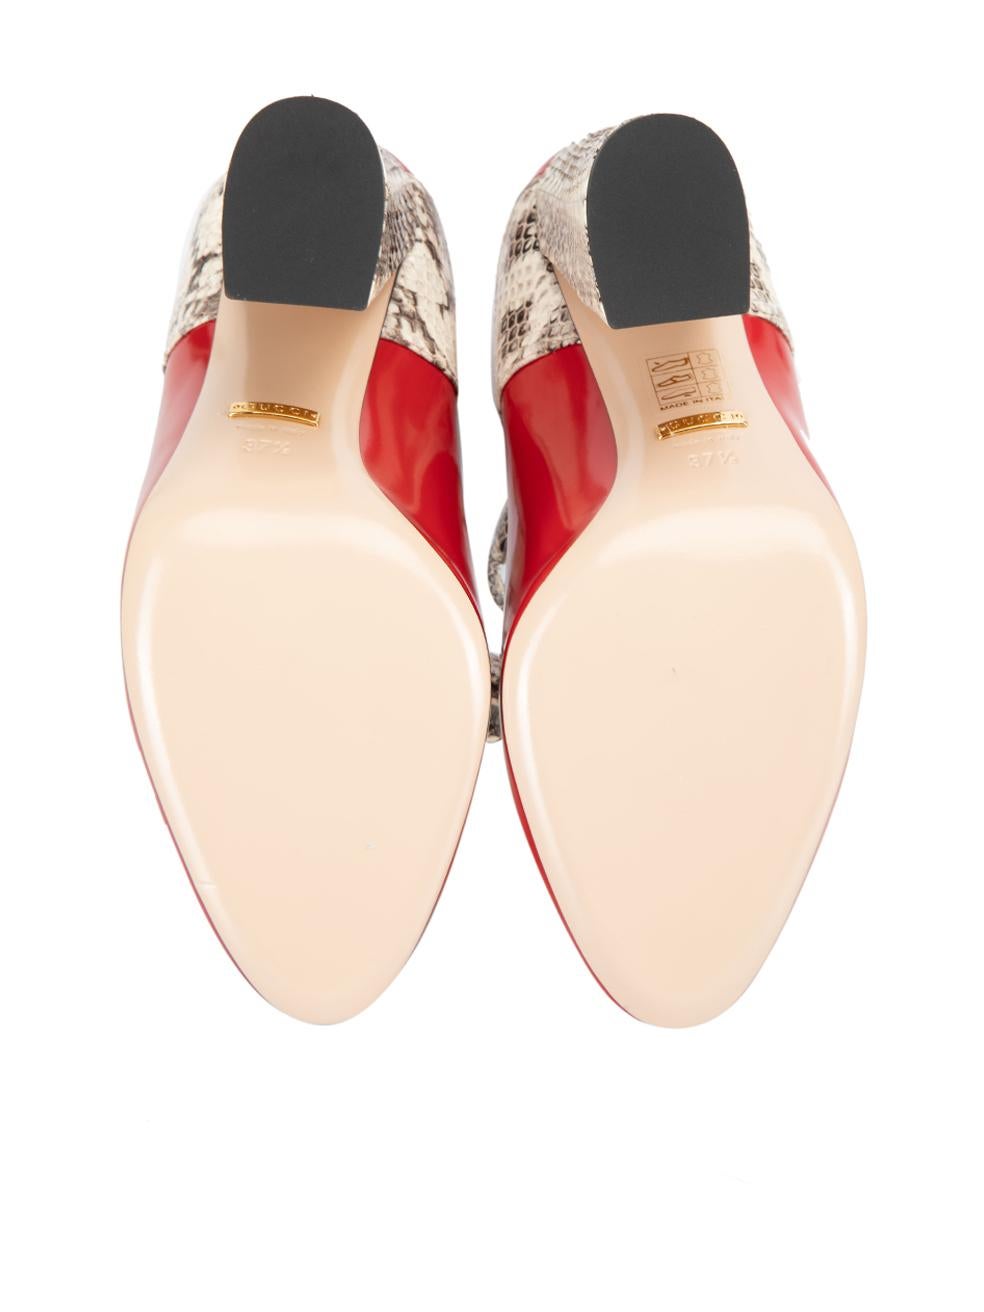 Gucci Women's Red Leather Snakeskin Bow Pumps 1